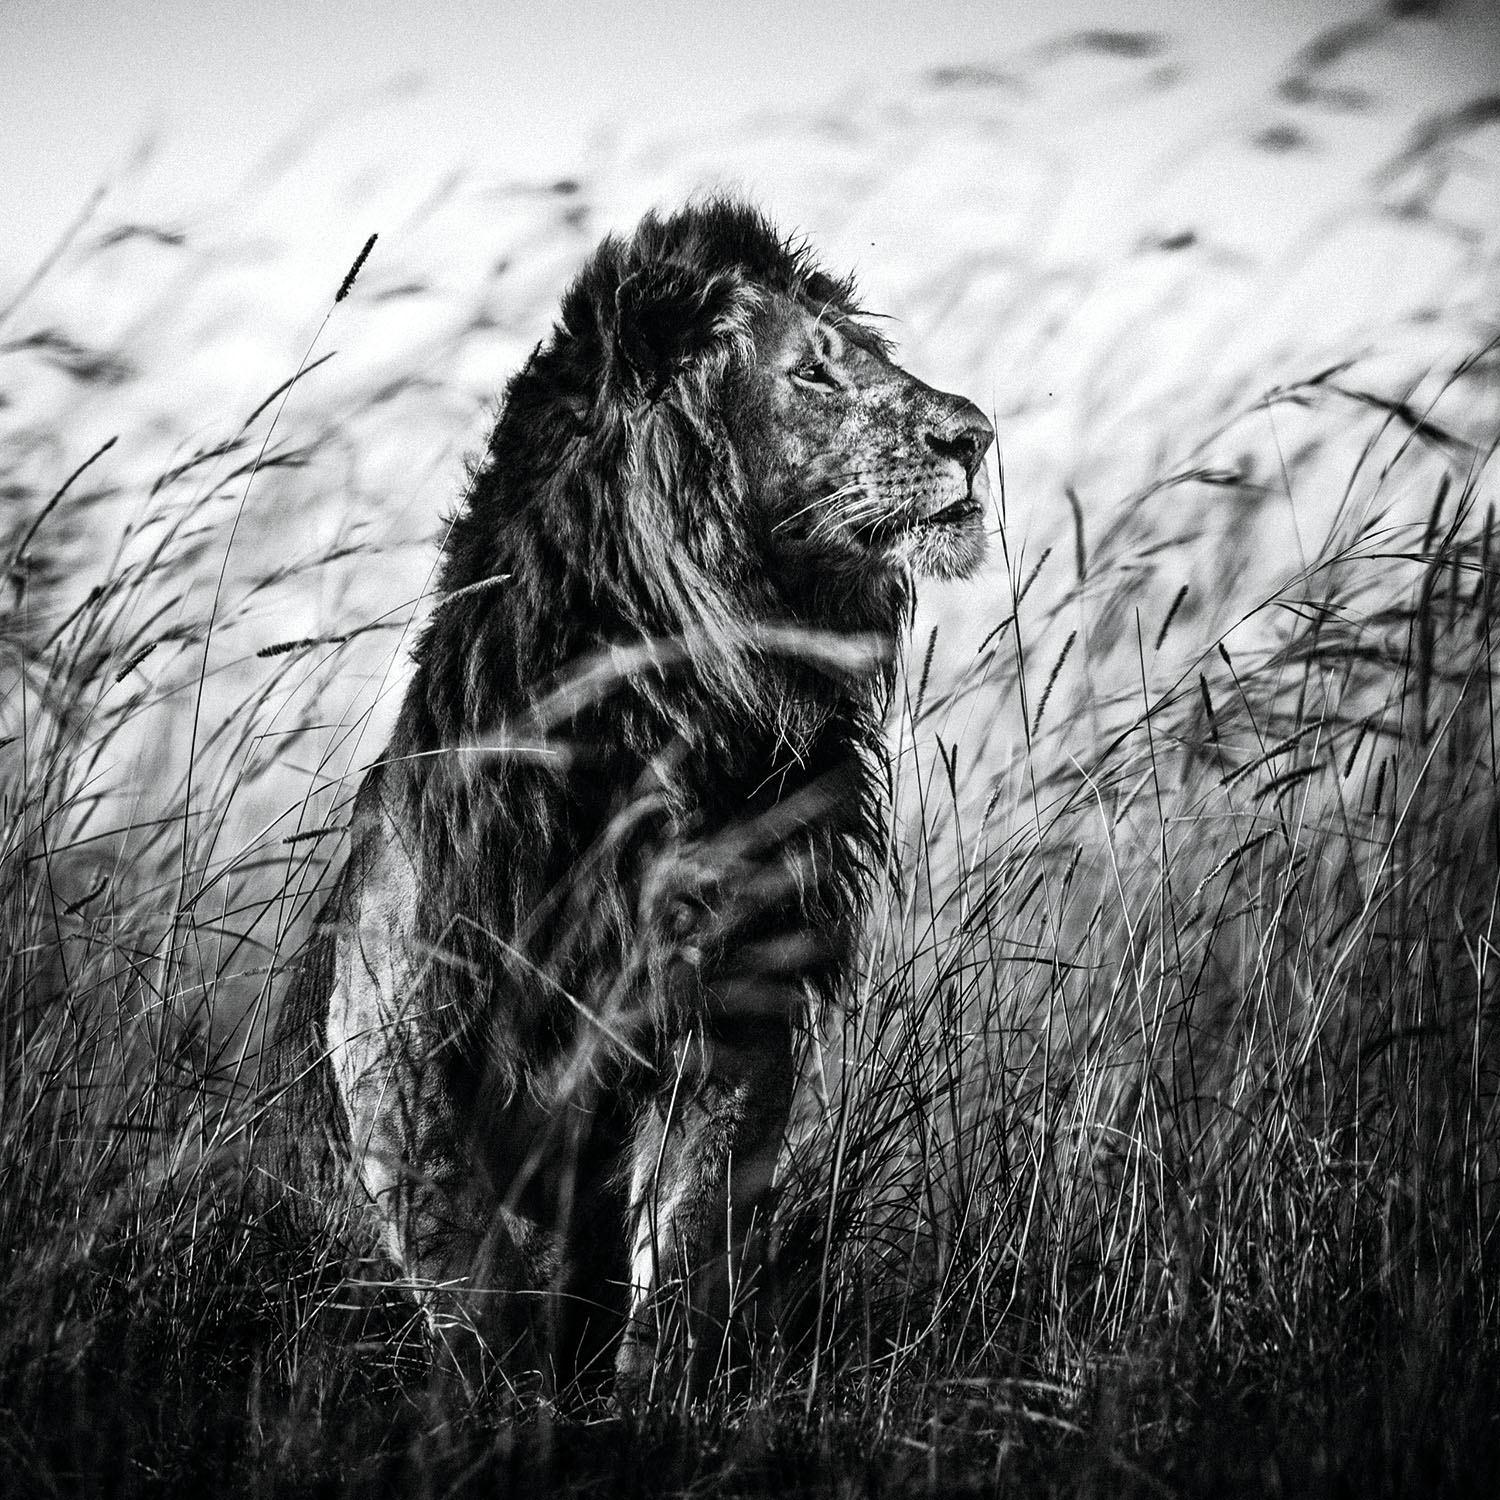 The Family Album of Wild Africa; Lion in the Grass